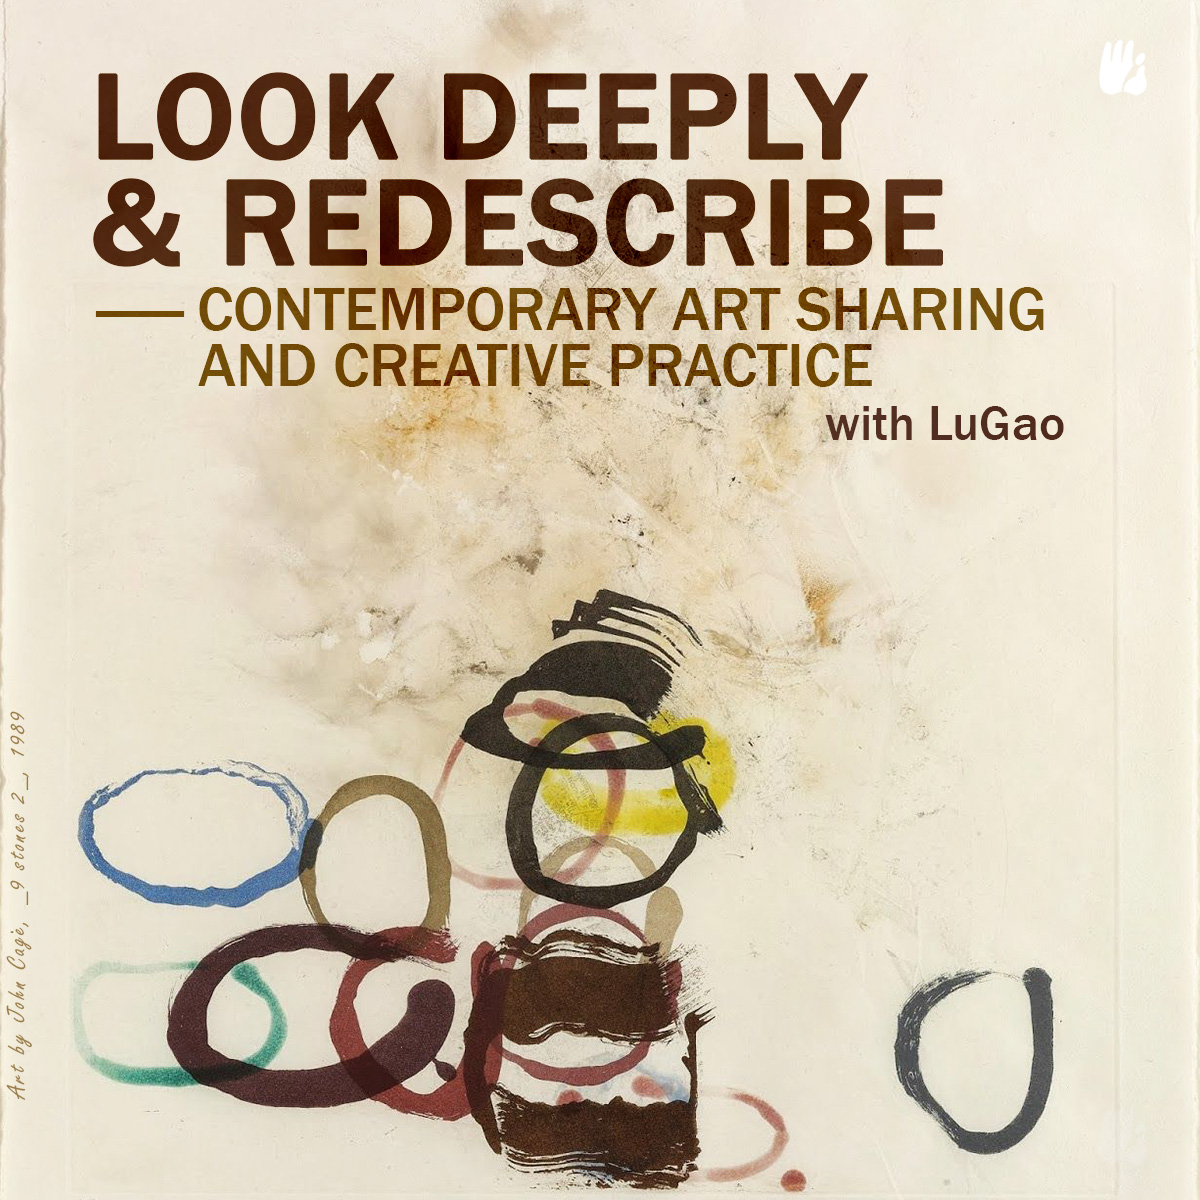 -Look Deeply & Redescribe --  Contemporary Art Sharing and Creative Practice